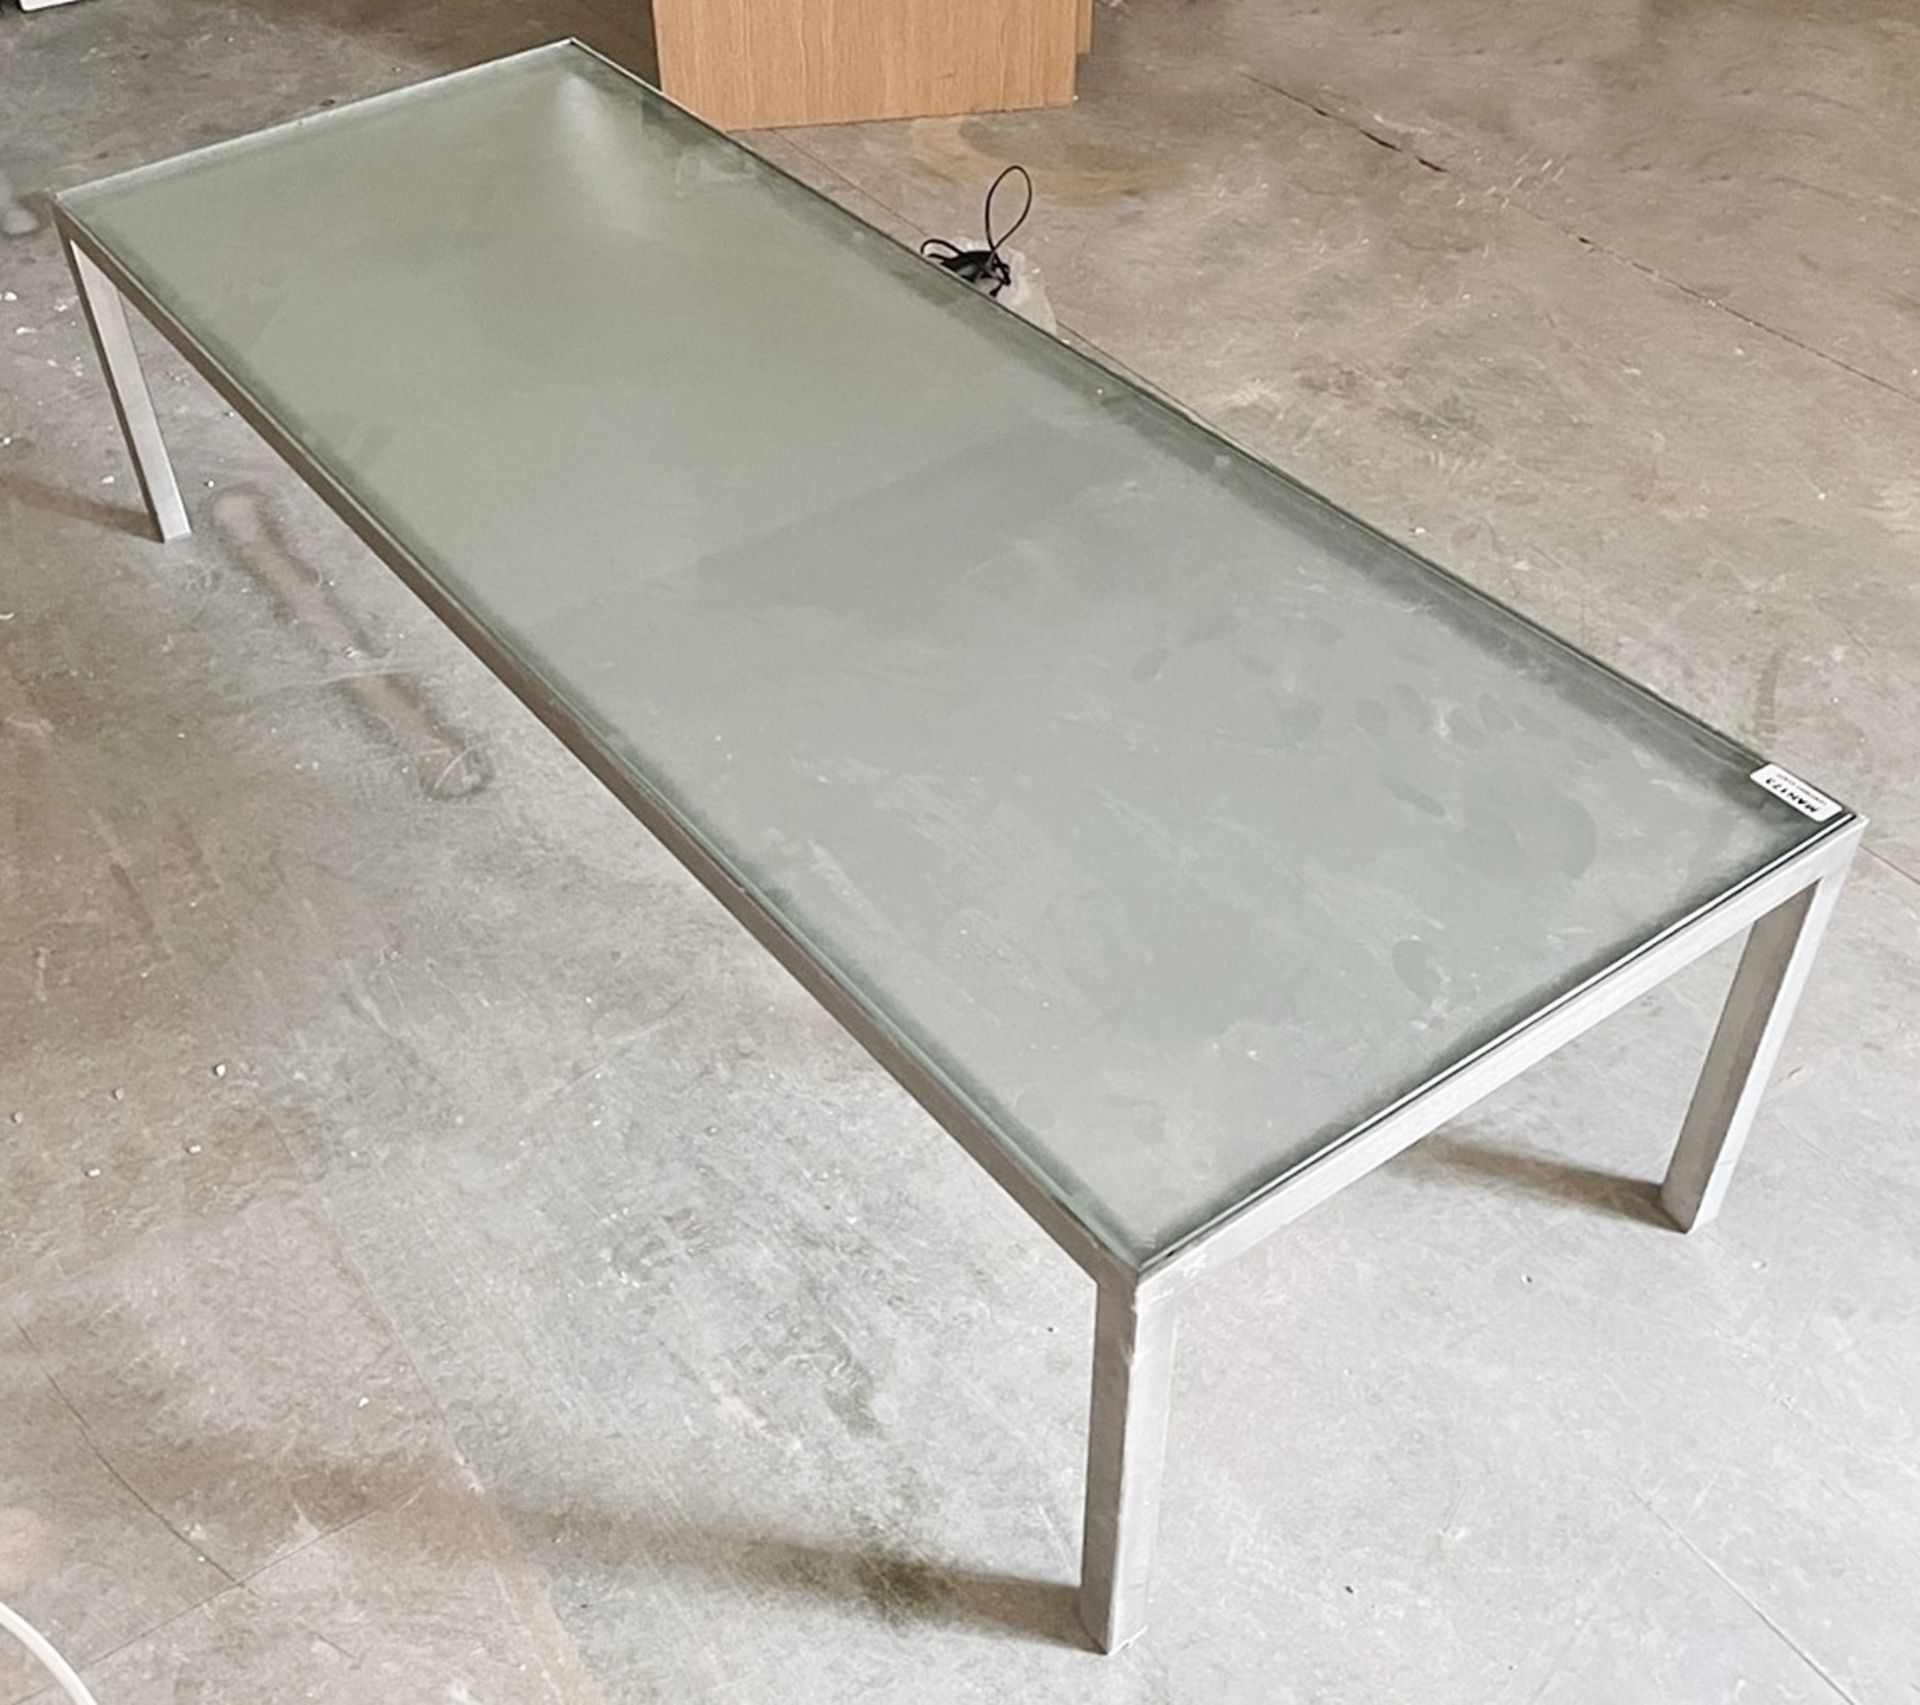 1 x Contemporary Low Coffee Table With Inlaid Glass Top And Metal Base - Dimensions: H37 x W155 x